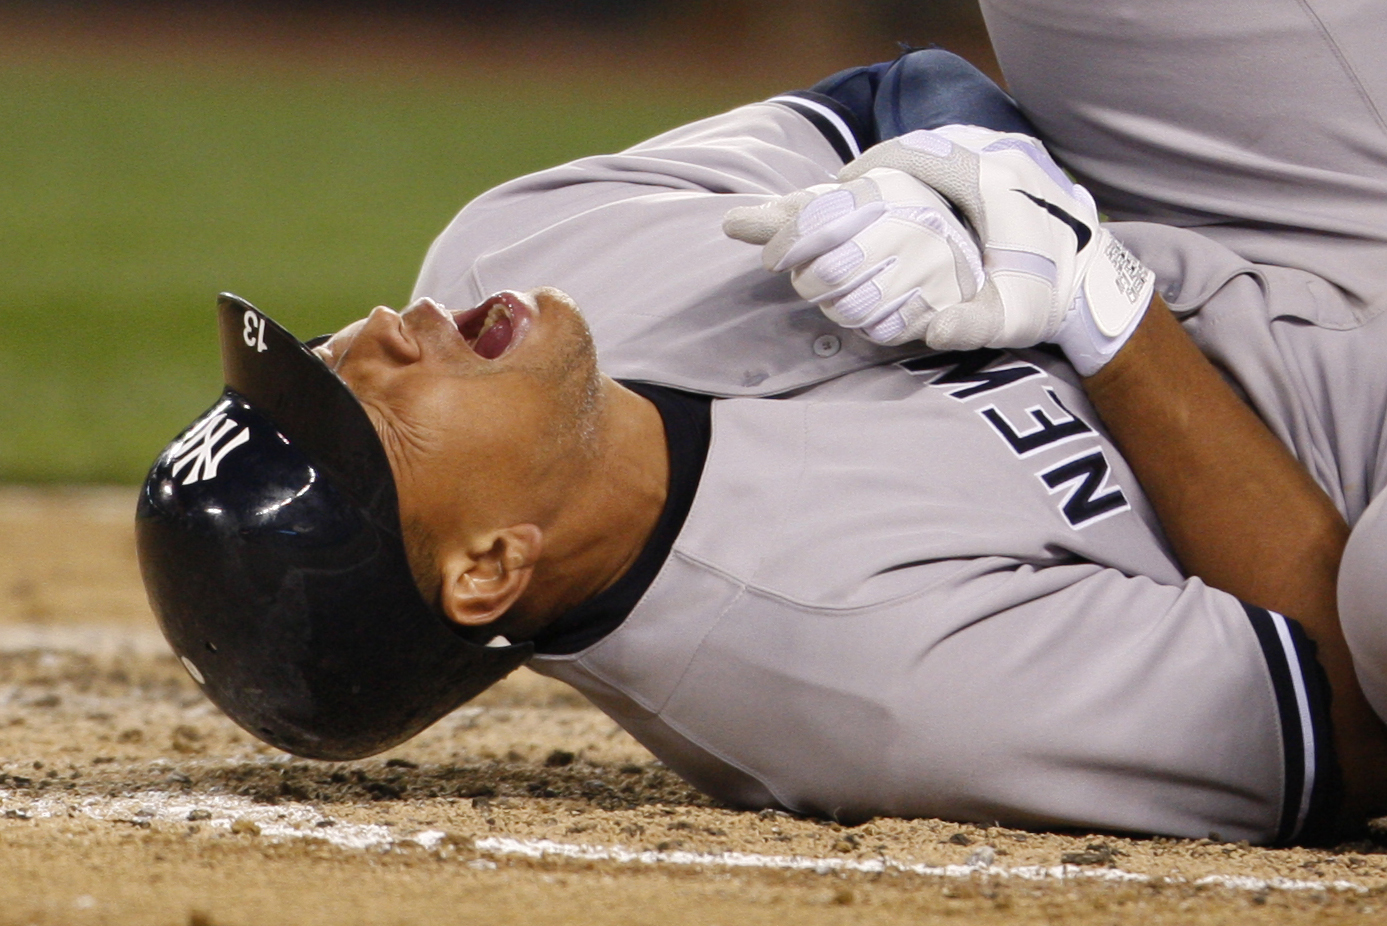 Rodriguez and Yankees Are Left Flailing in Loss to Rays - The New